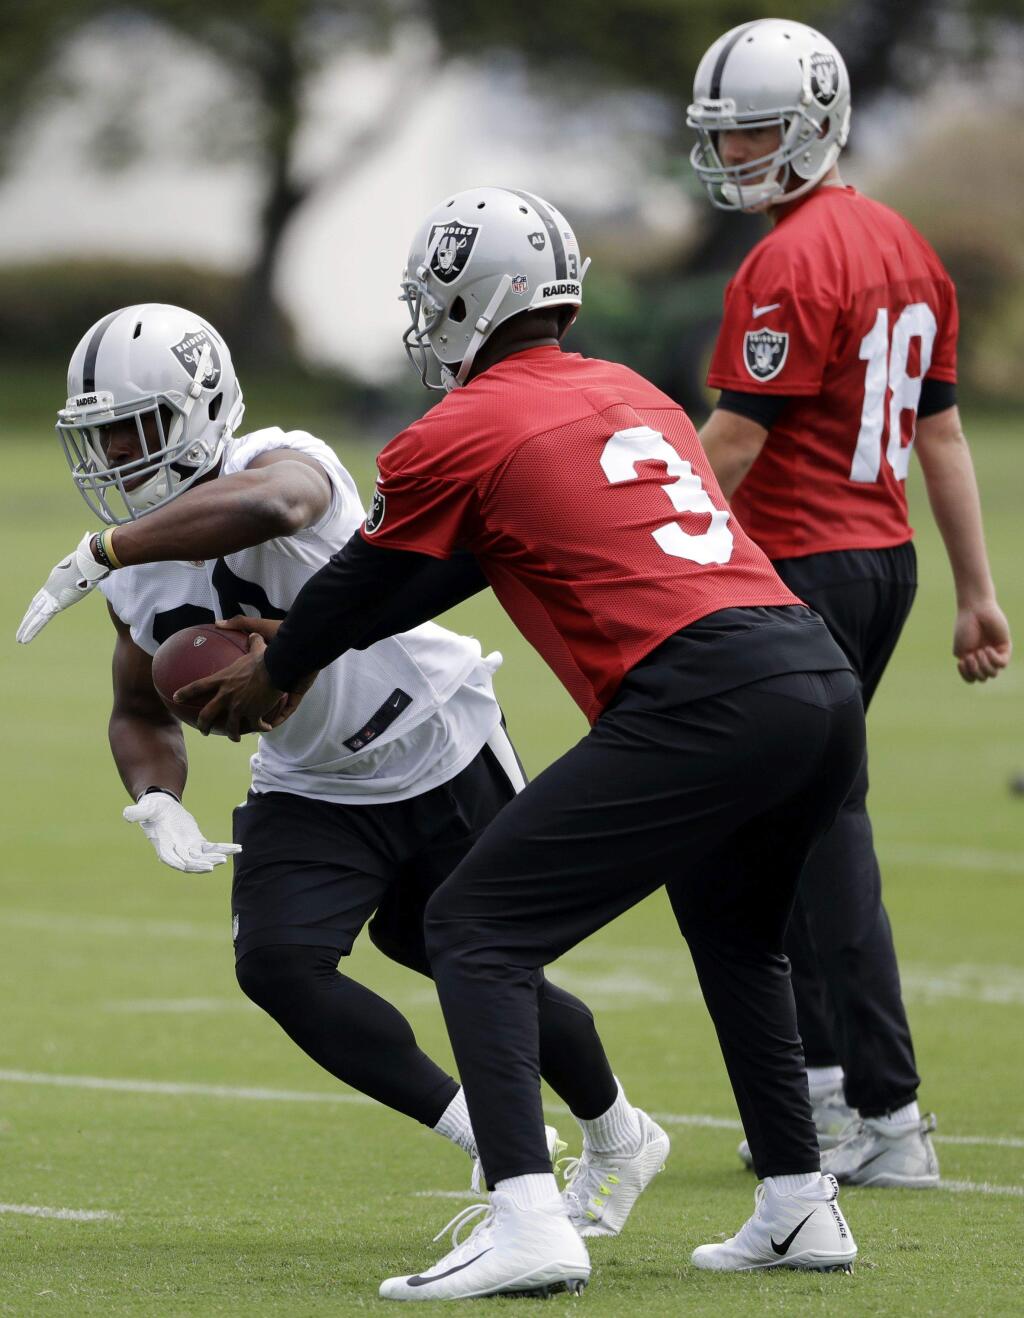 Oakland Raiders running back Elijah Hood, left, takes a handoff from quarterback EJ Manuel during the team's practice Tuesday, May 30, 2017, in Alameda. (AP Photo/Marcio Jose Sanchez)